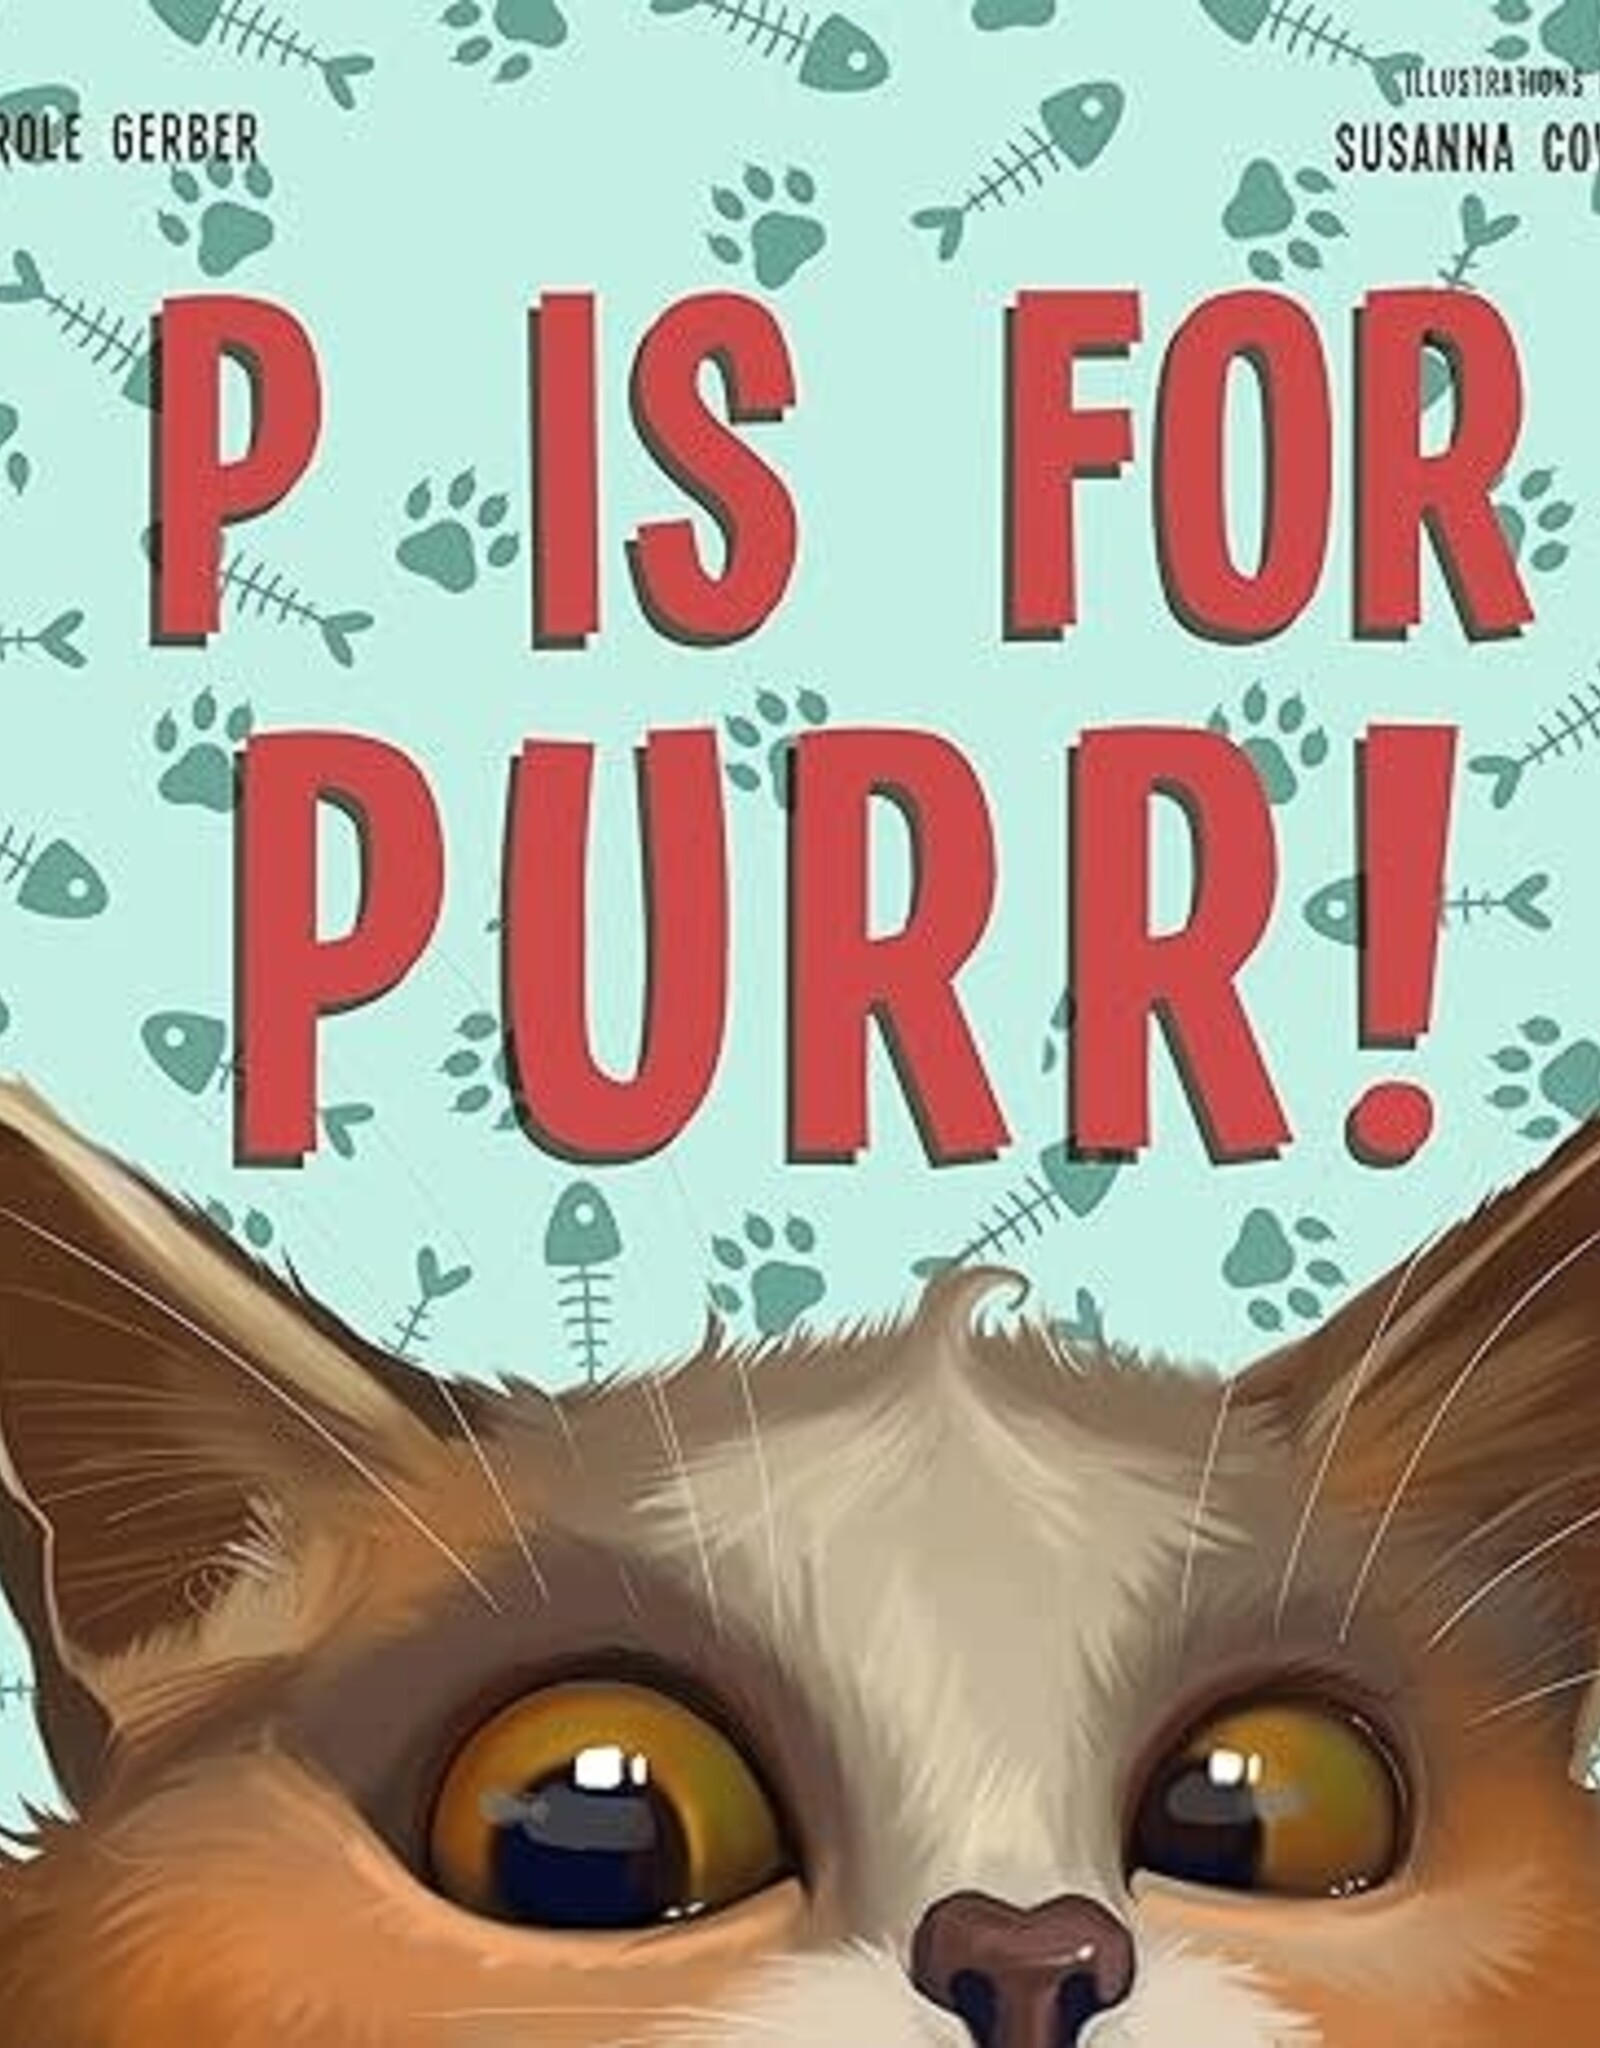 P is for Purr